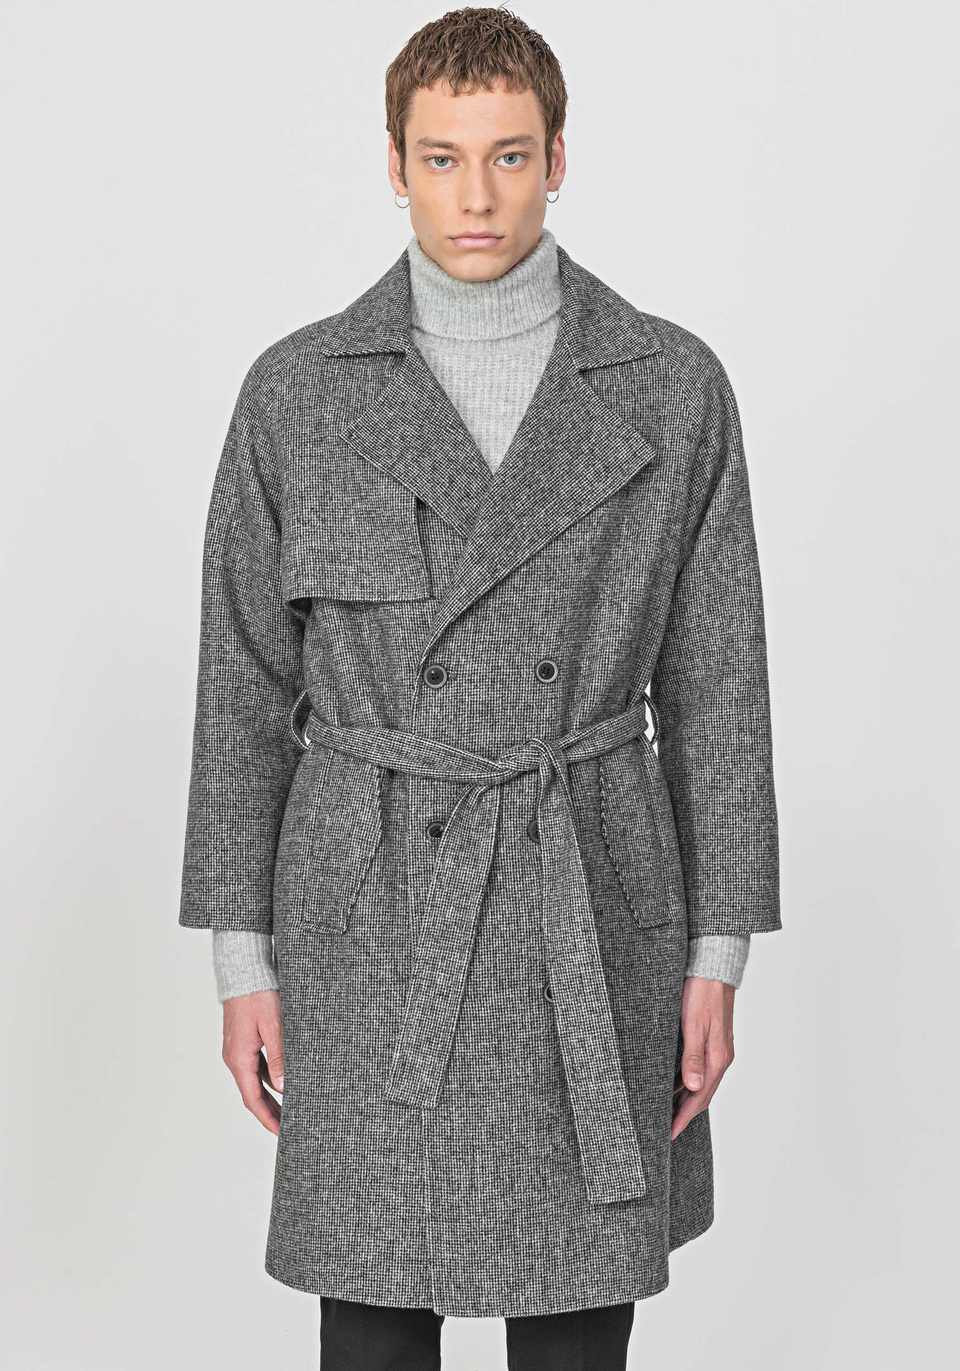 DOUBLE-BREASTED COAT IN A SOFT WOOL BLEND - Antony Morato Online Shop